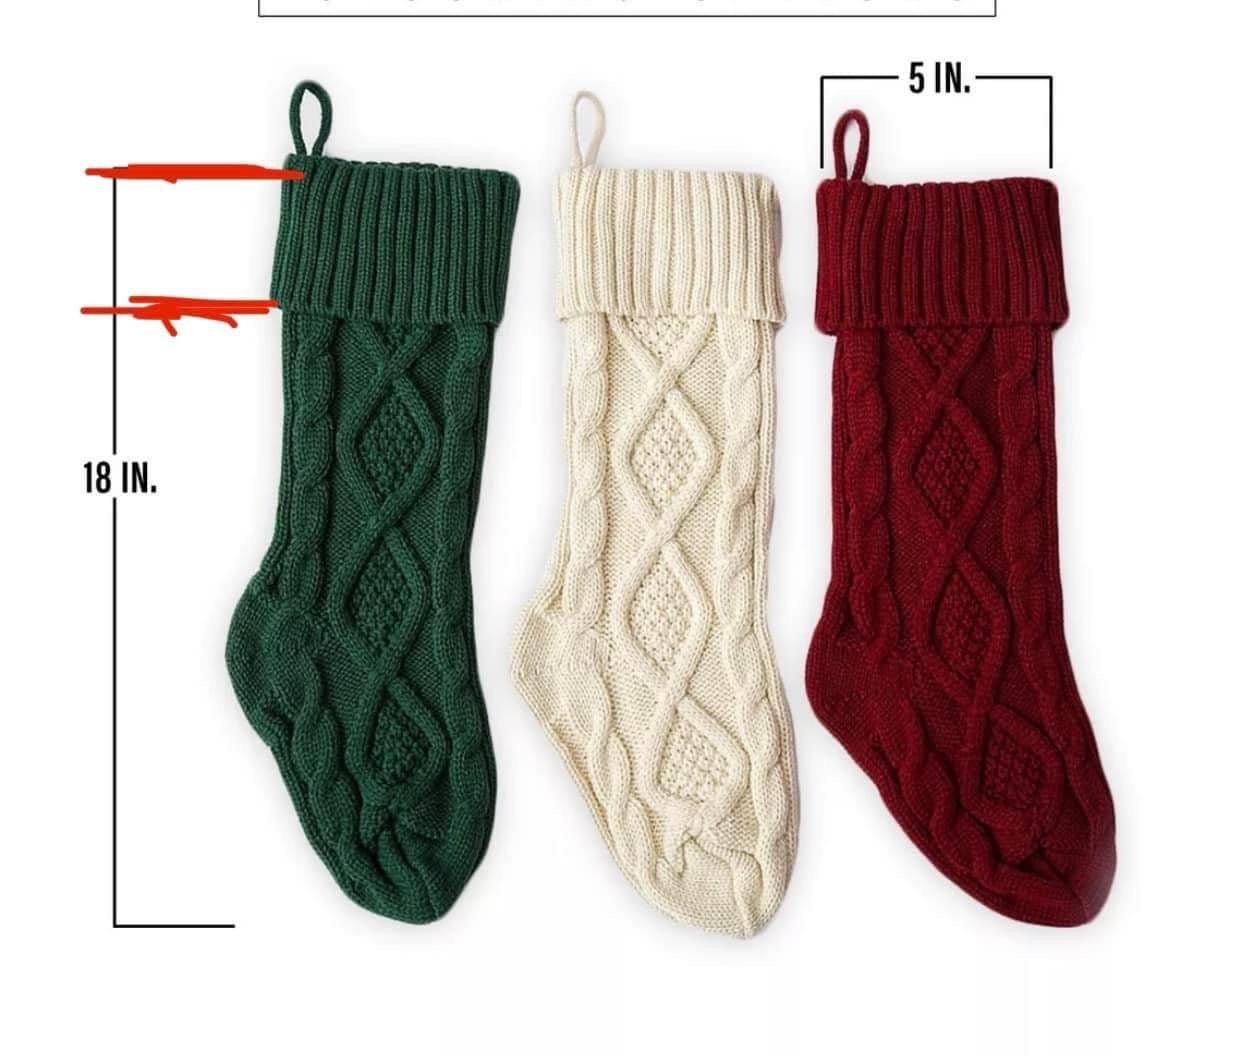 Personalized Knit Christmas Stocking